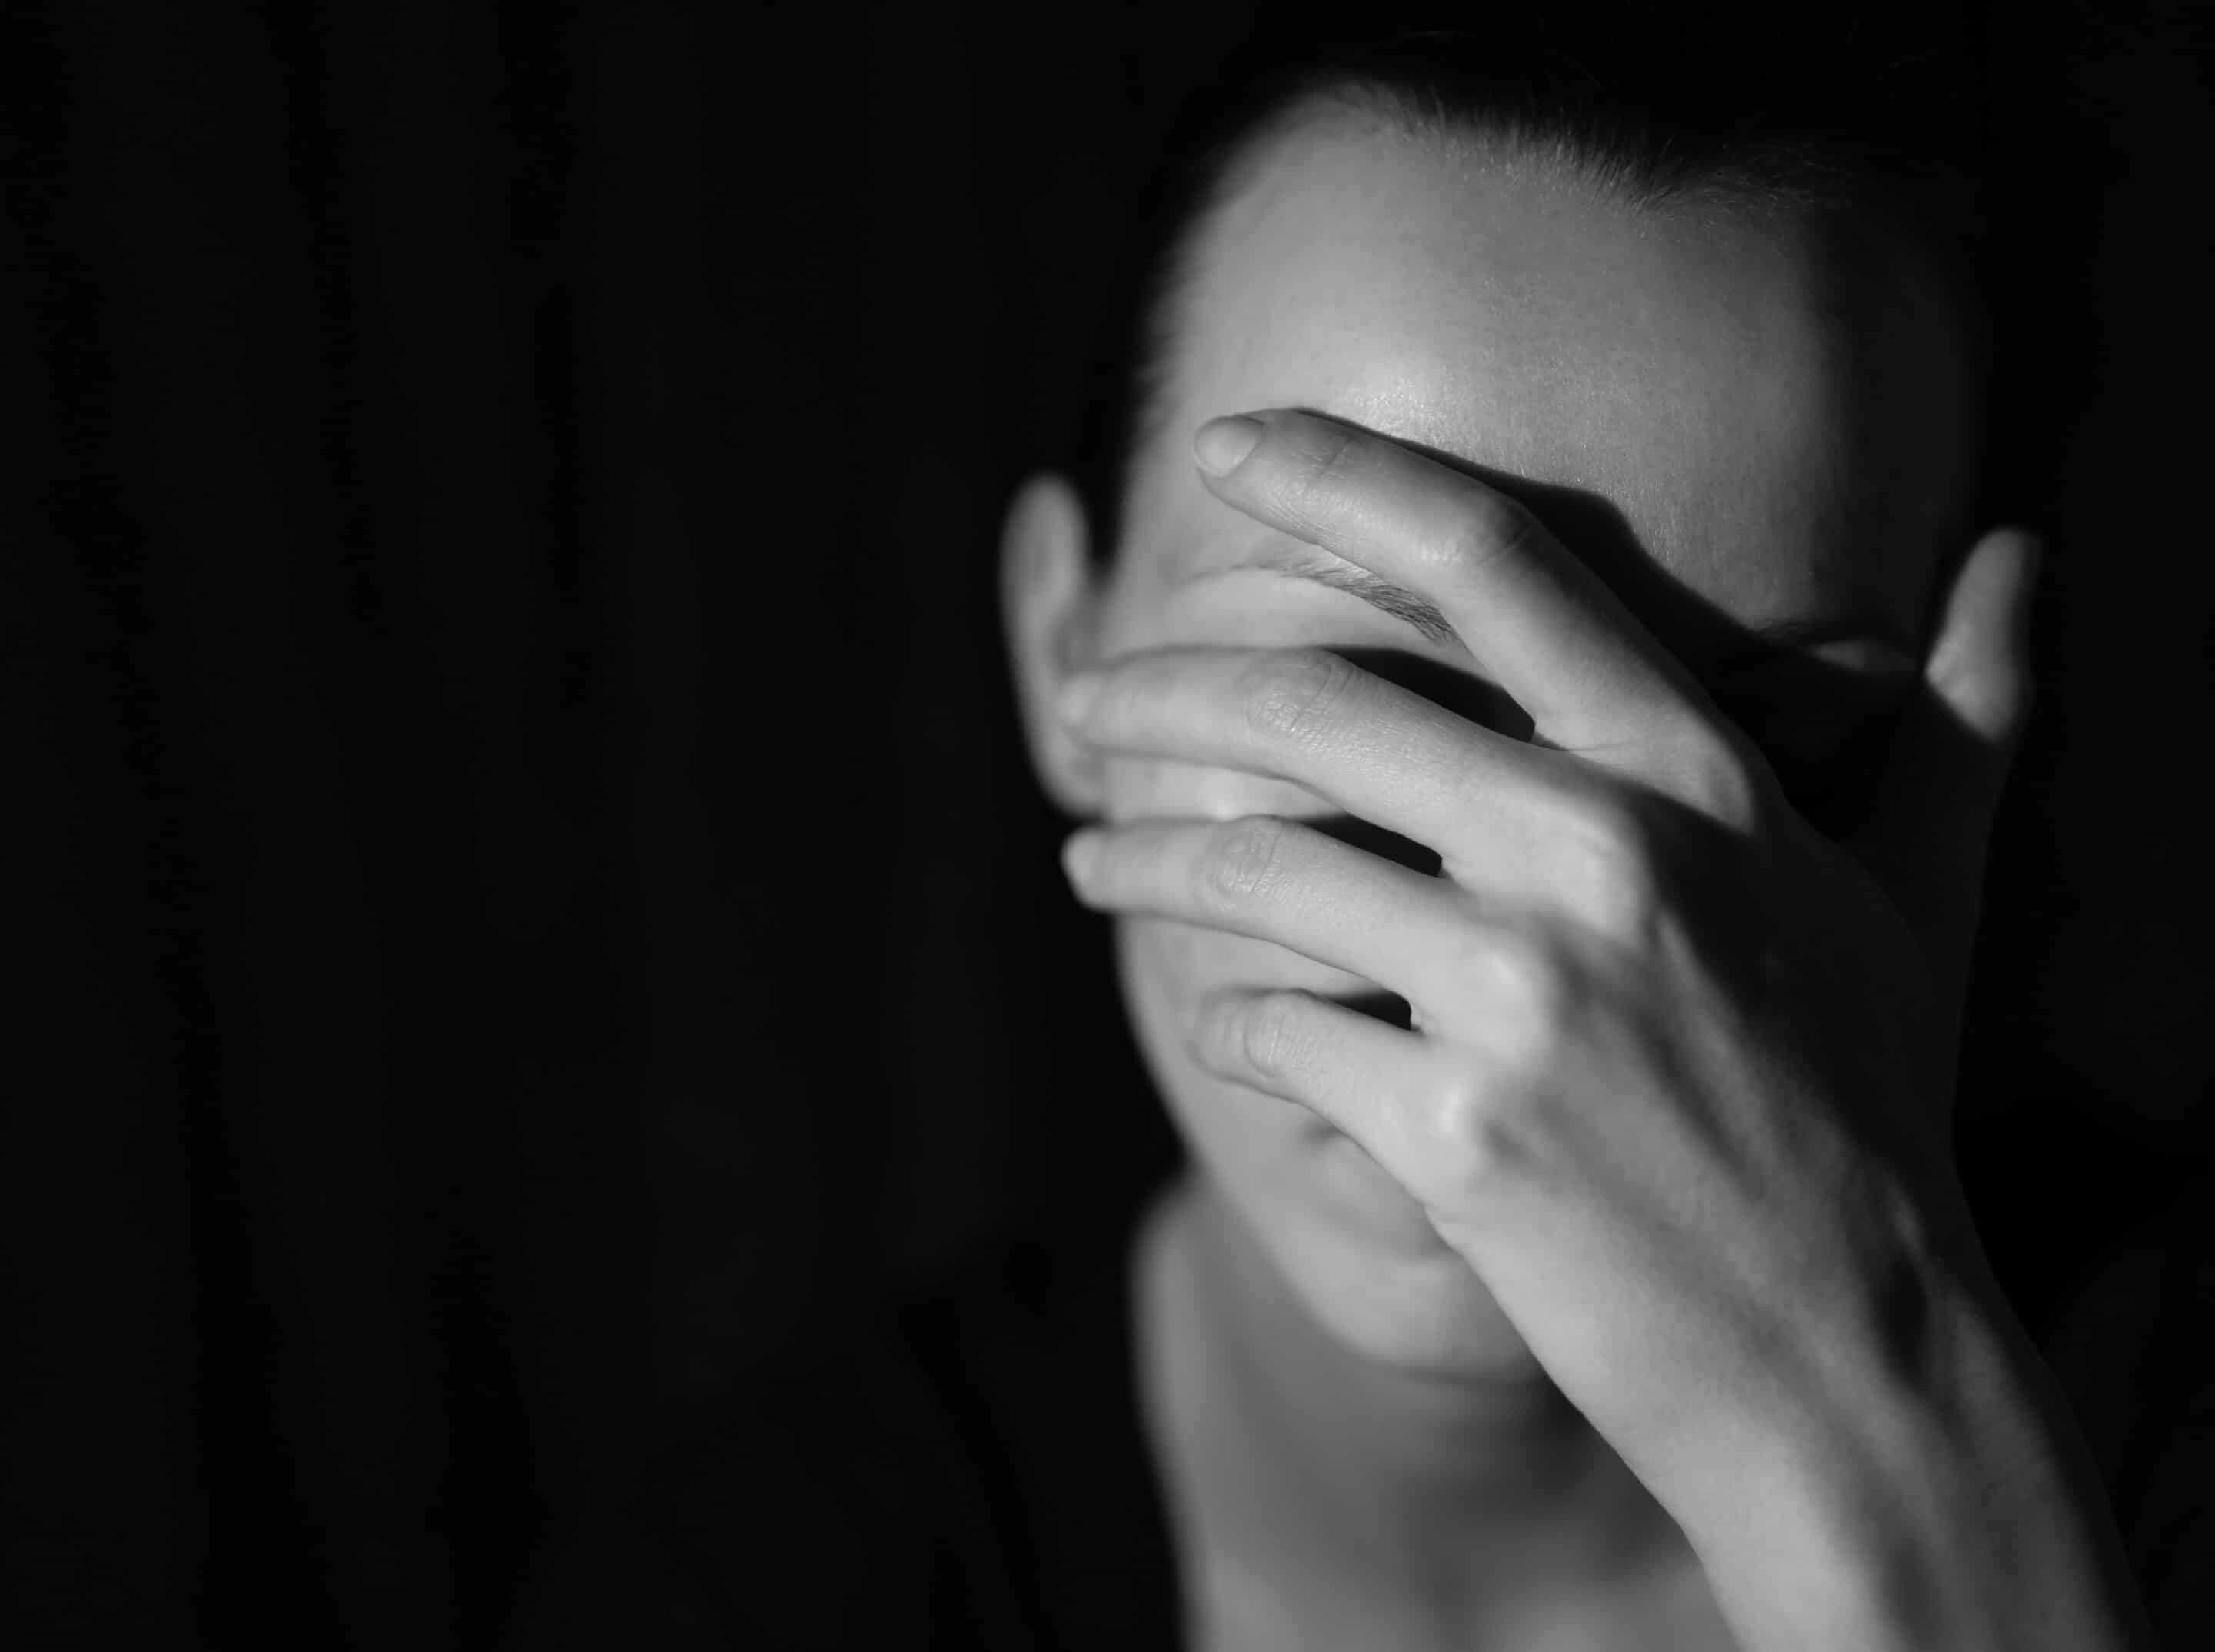 How to Deal with Shame in Recovery